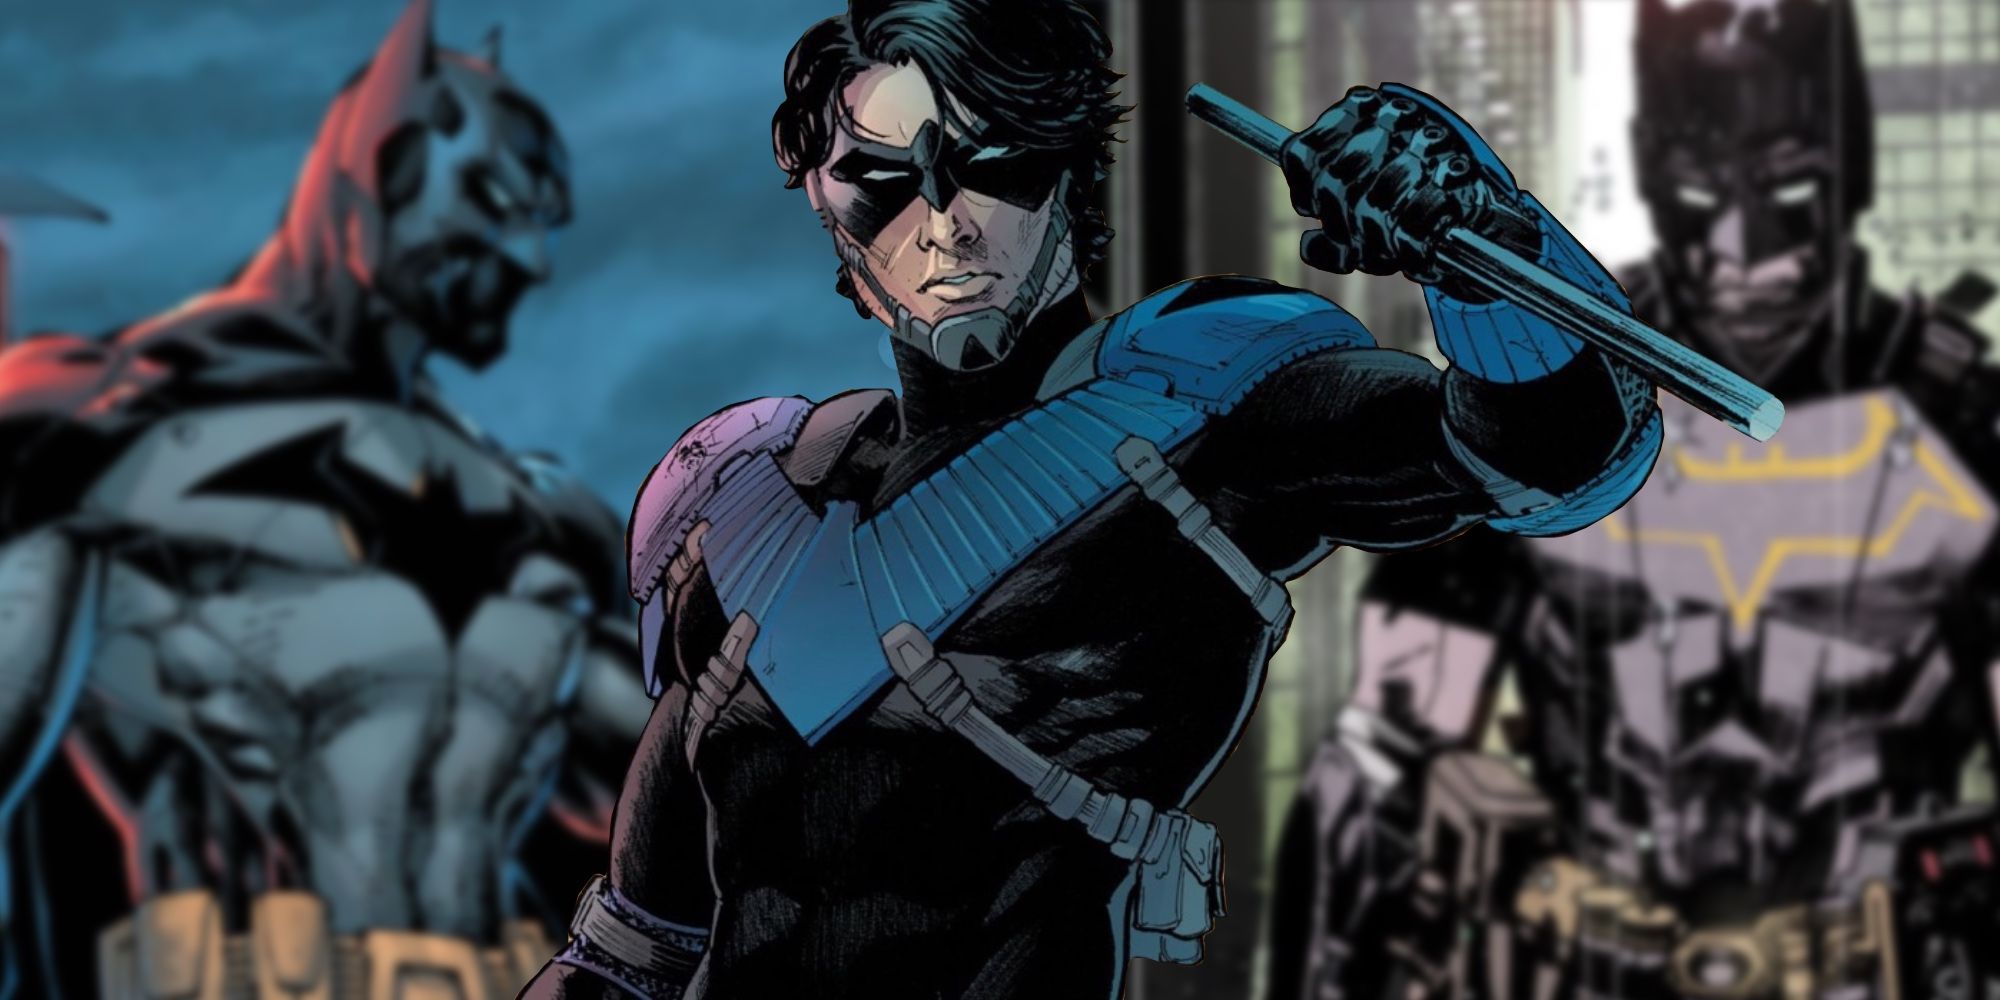 Nightwing Launches A New Battle for Batman's Cowl in DC's Future Featured